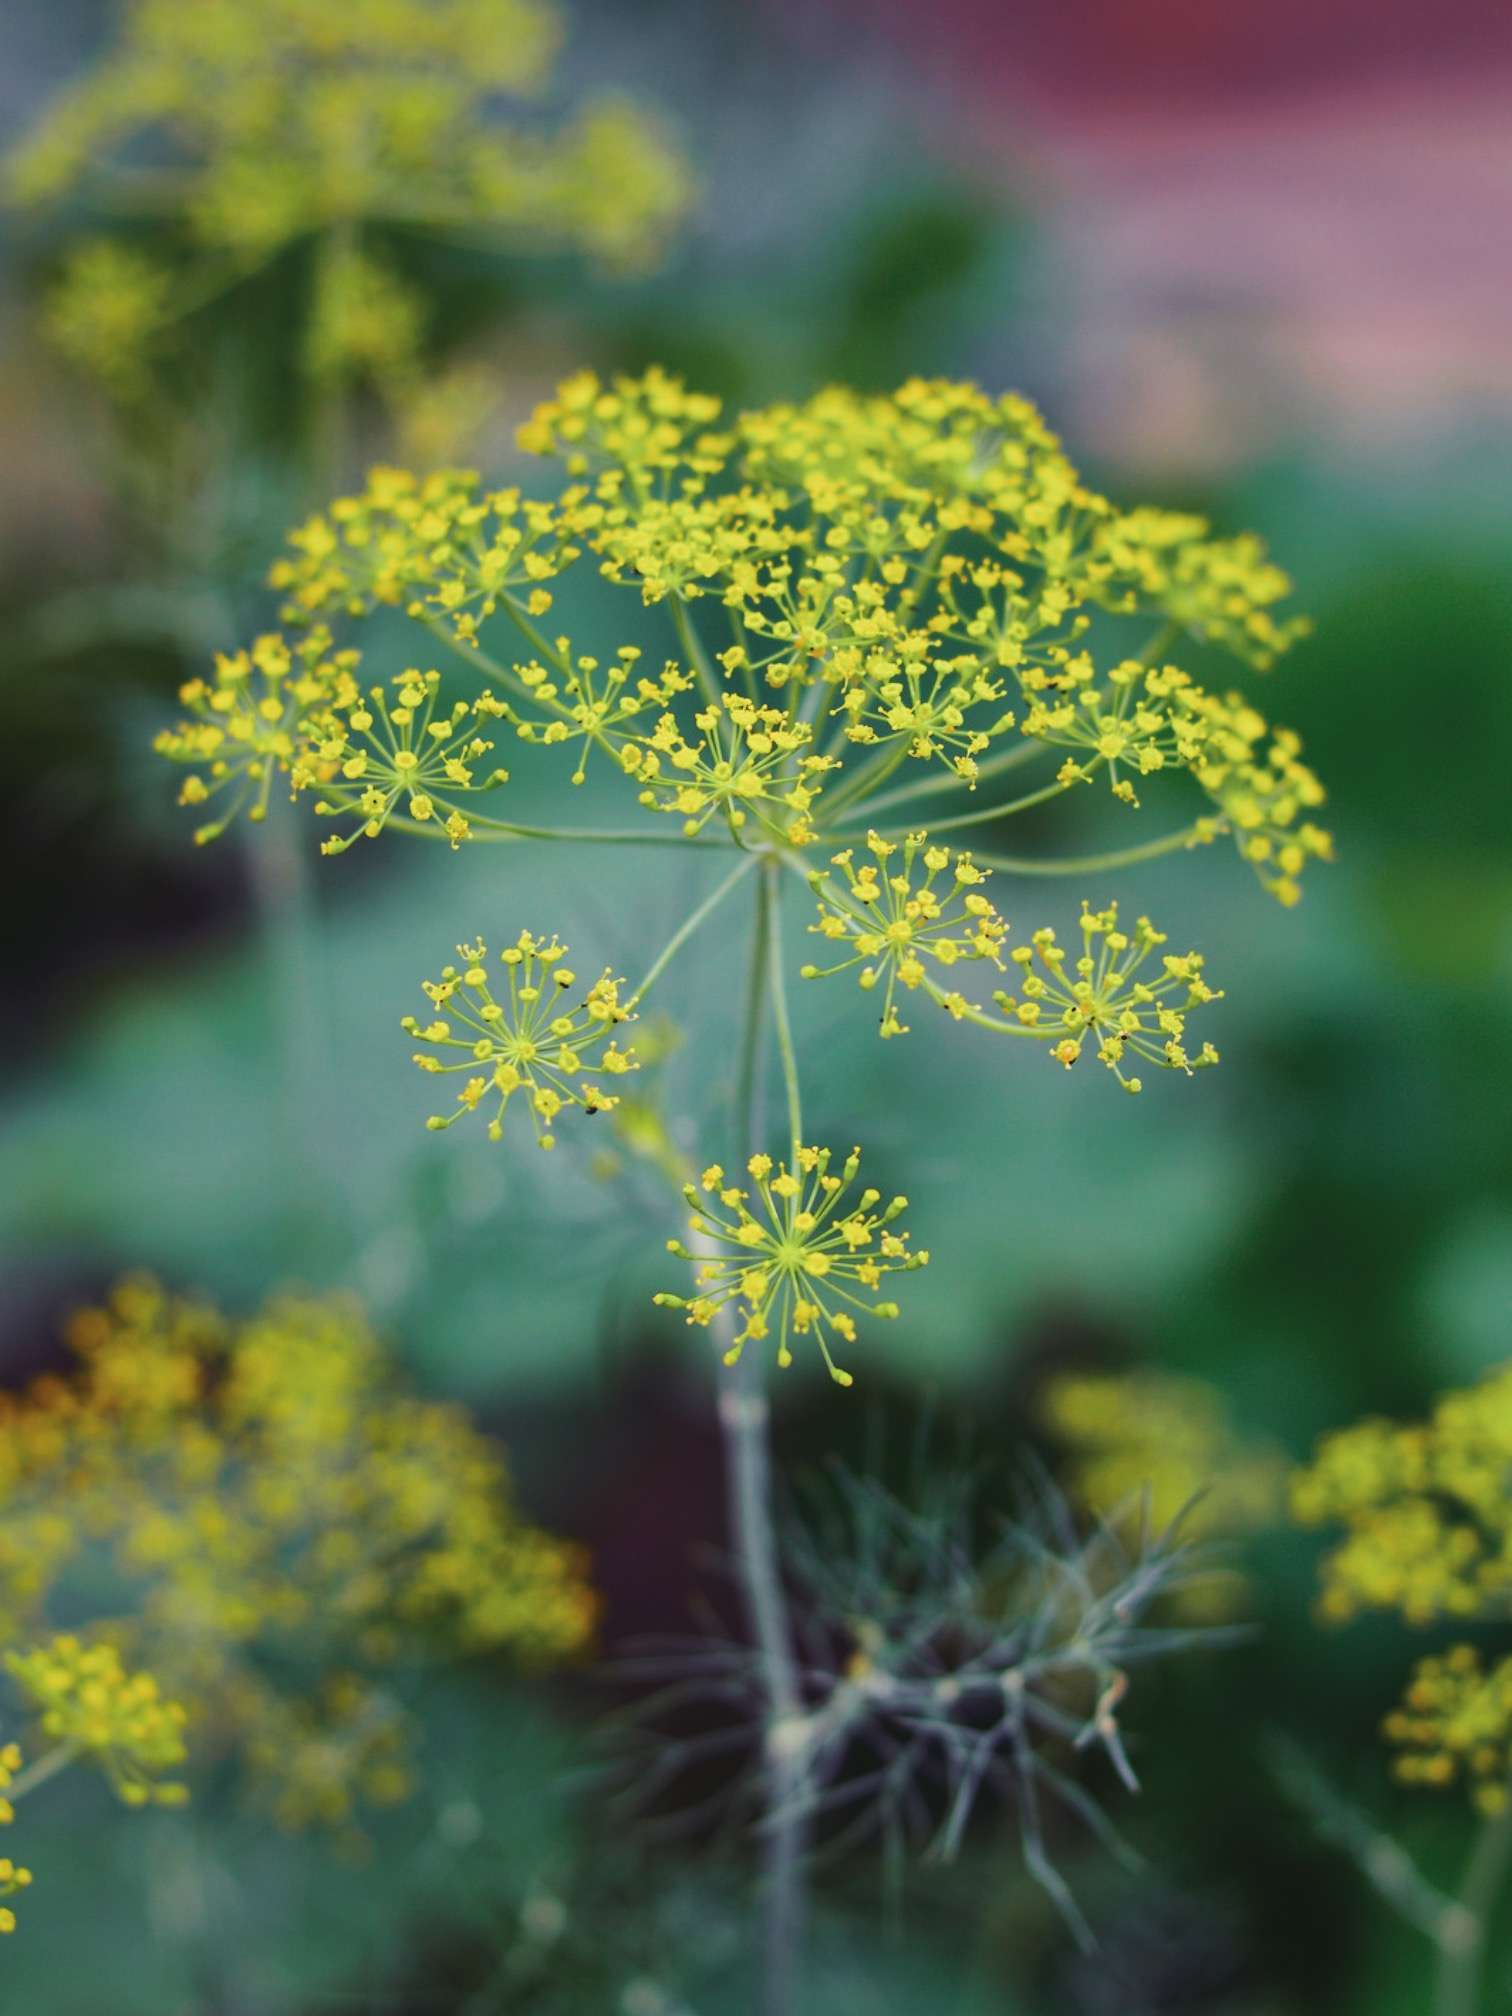 A photo of a dill head blooming to attract beneficial insects as a companion plant